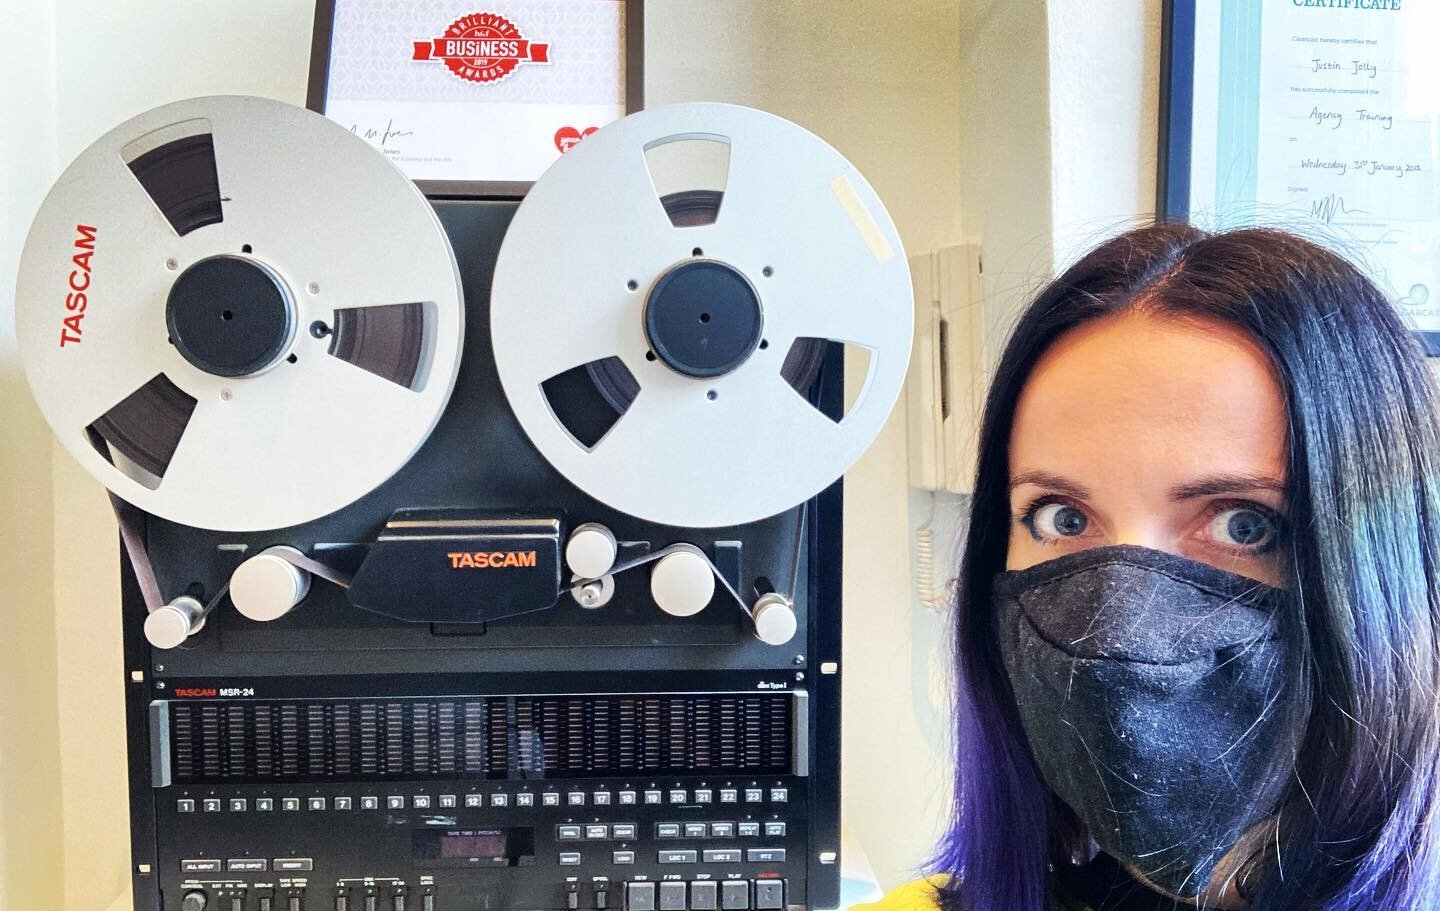 🎧 For Real with Reel to Reel 🎧 #oldschool #recording #voiceoverartist #retro @thevoiceovergallery #londonstudio #reeltoreel @tascam_official #taperecorder